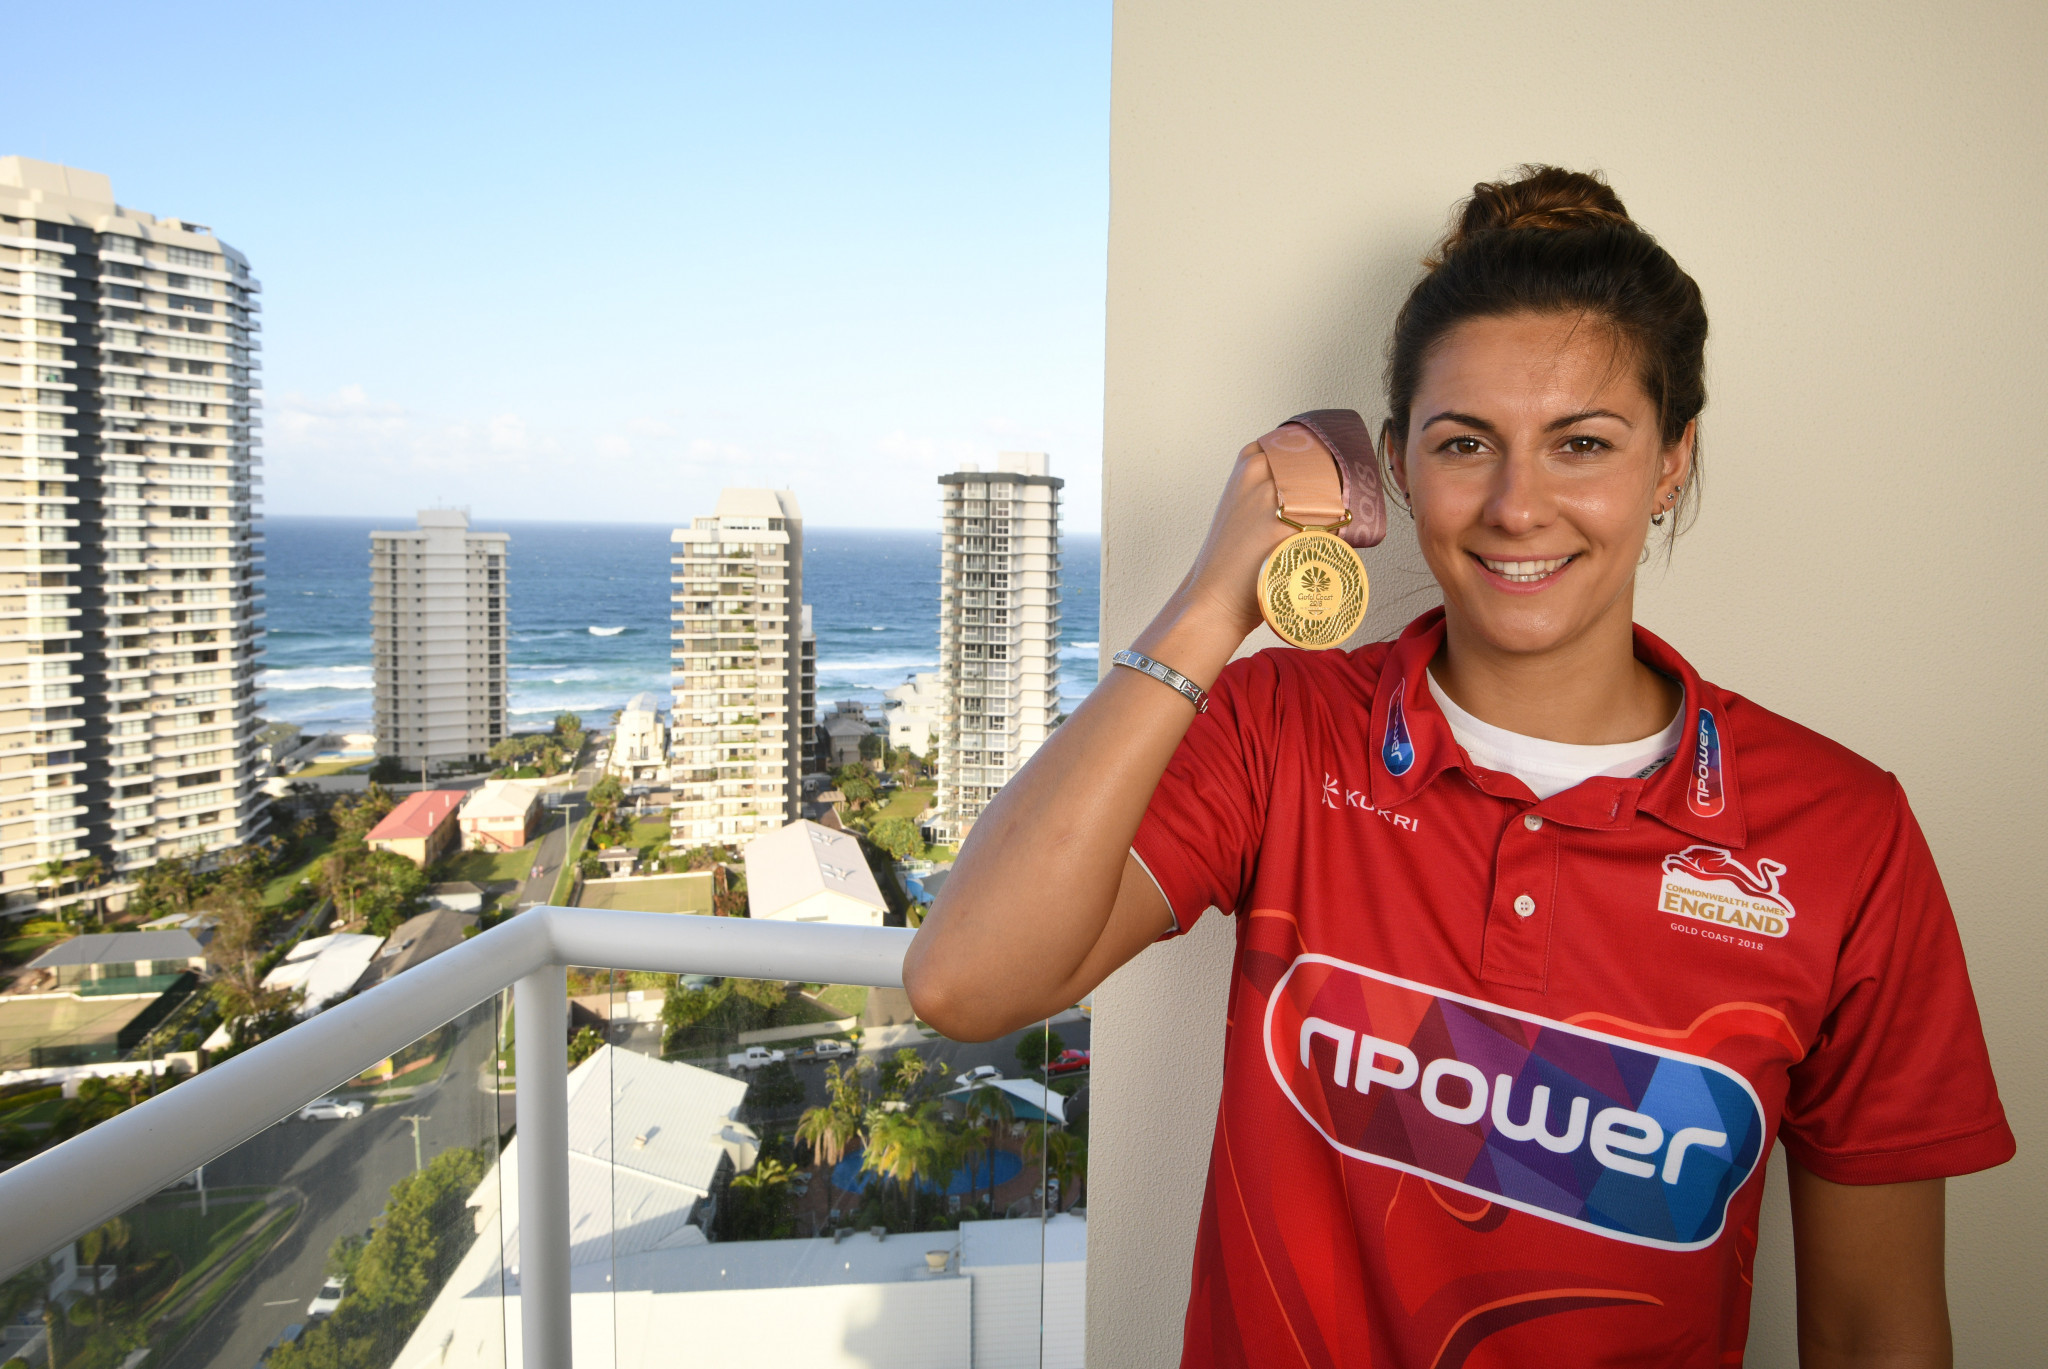 Aimee Willmott earned Commonwealth gold in the women's 400m individual medley at Gold Coast 2018 ©Getty Images